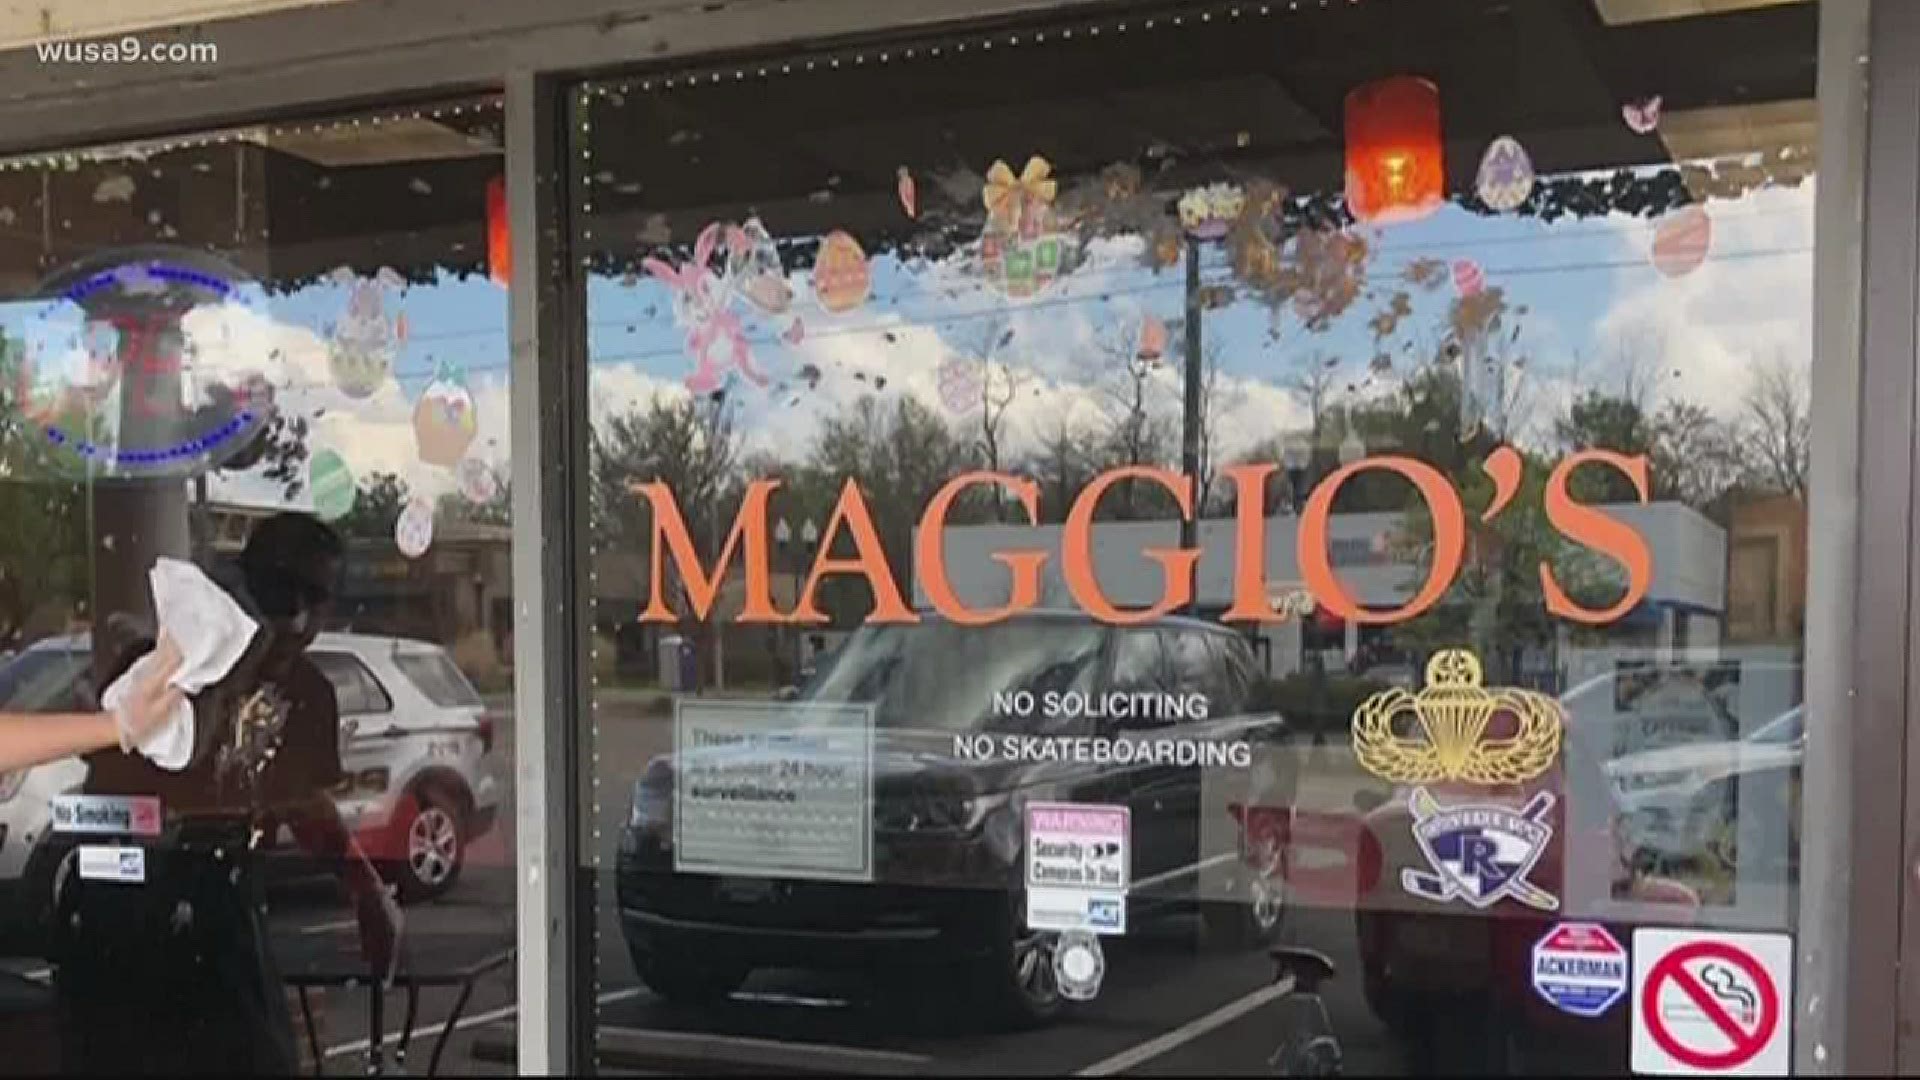 The owners of Maggios in Fairfax County say someone came into their small family business and shoved, punched, and threw food on them.